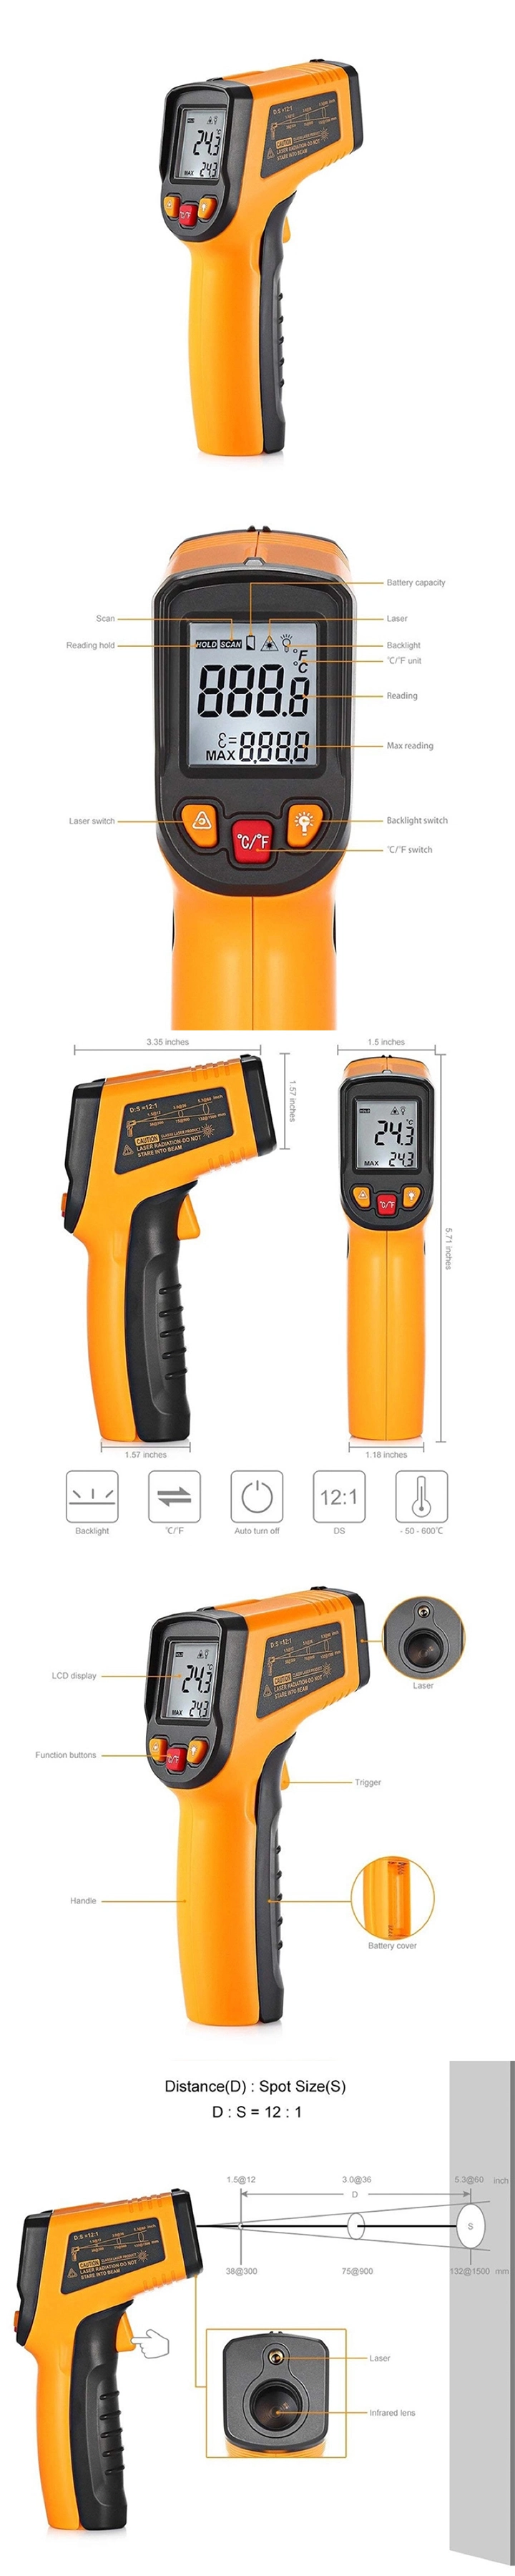 GM320 Digital Non Contact Laser Infrared Oven Thermometer Sensor -50-380 Degree Temperature Pyrometer IR Laser Industrial Thermometer Gun